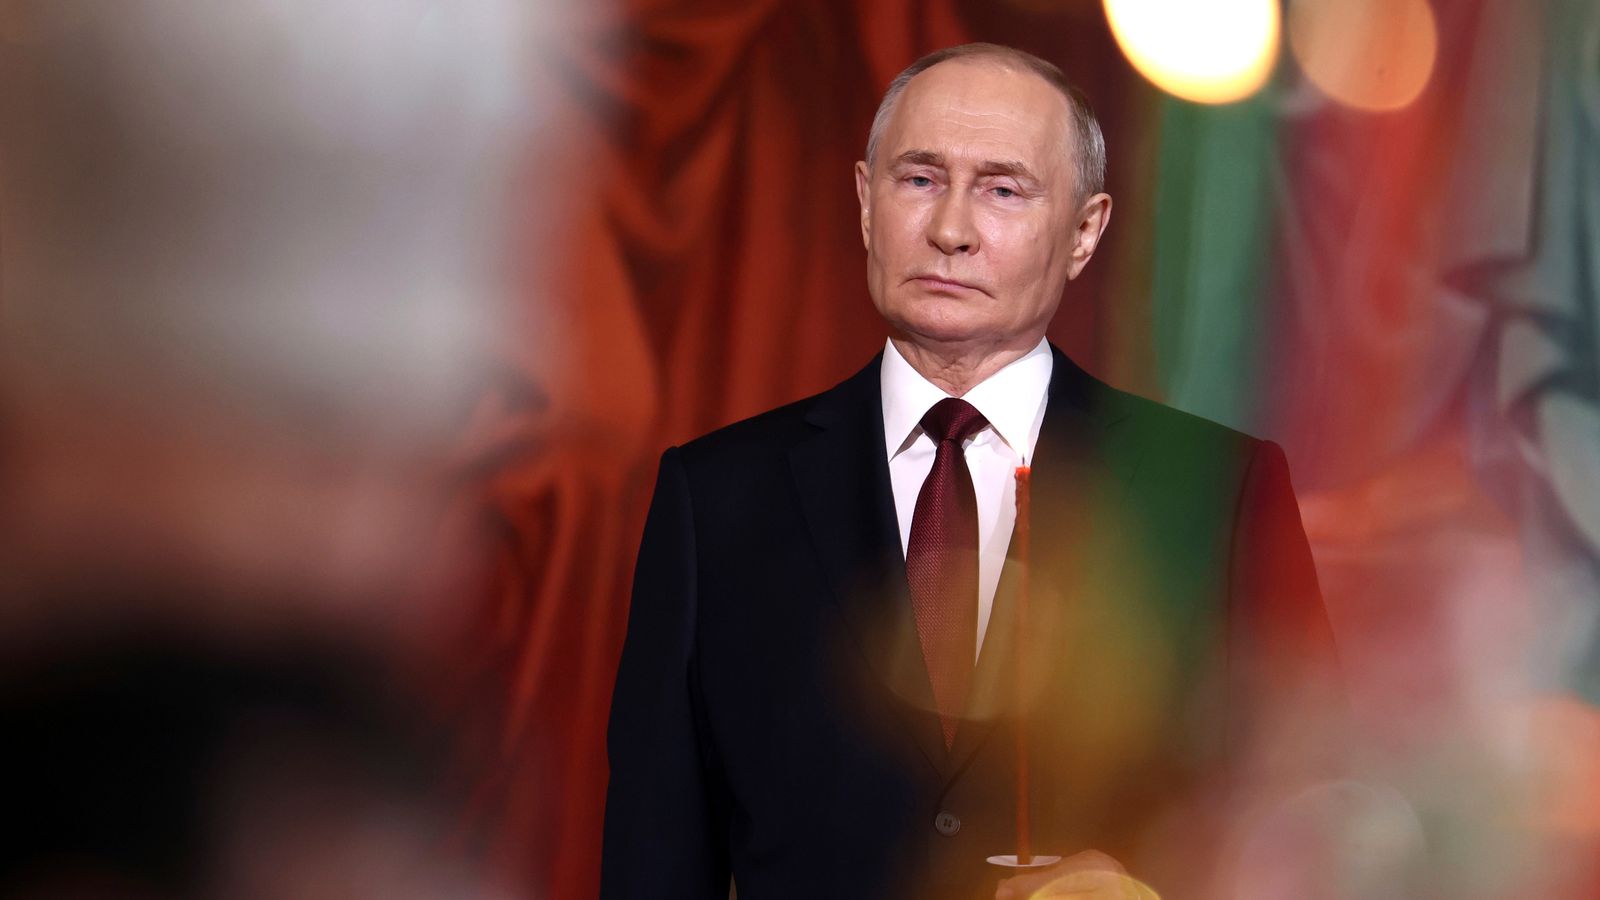 putin's fifth inauguration marks more of the same for a russia with little choice